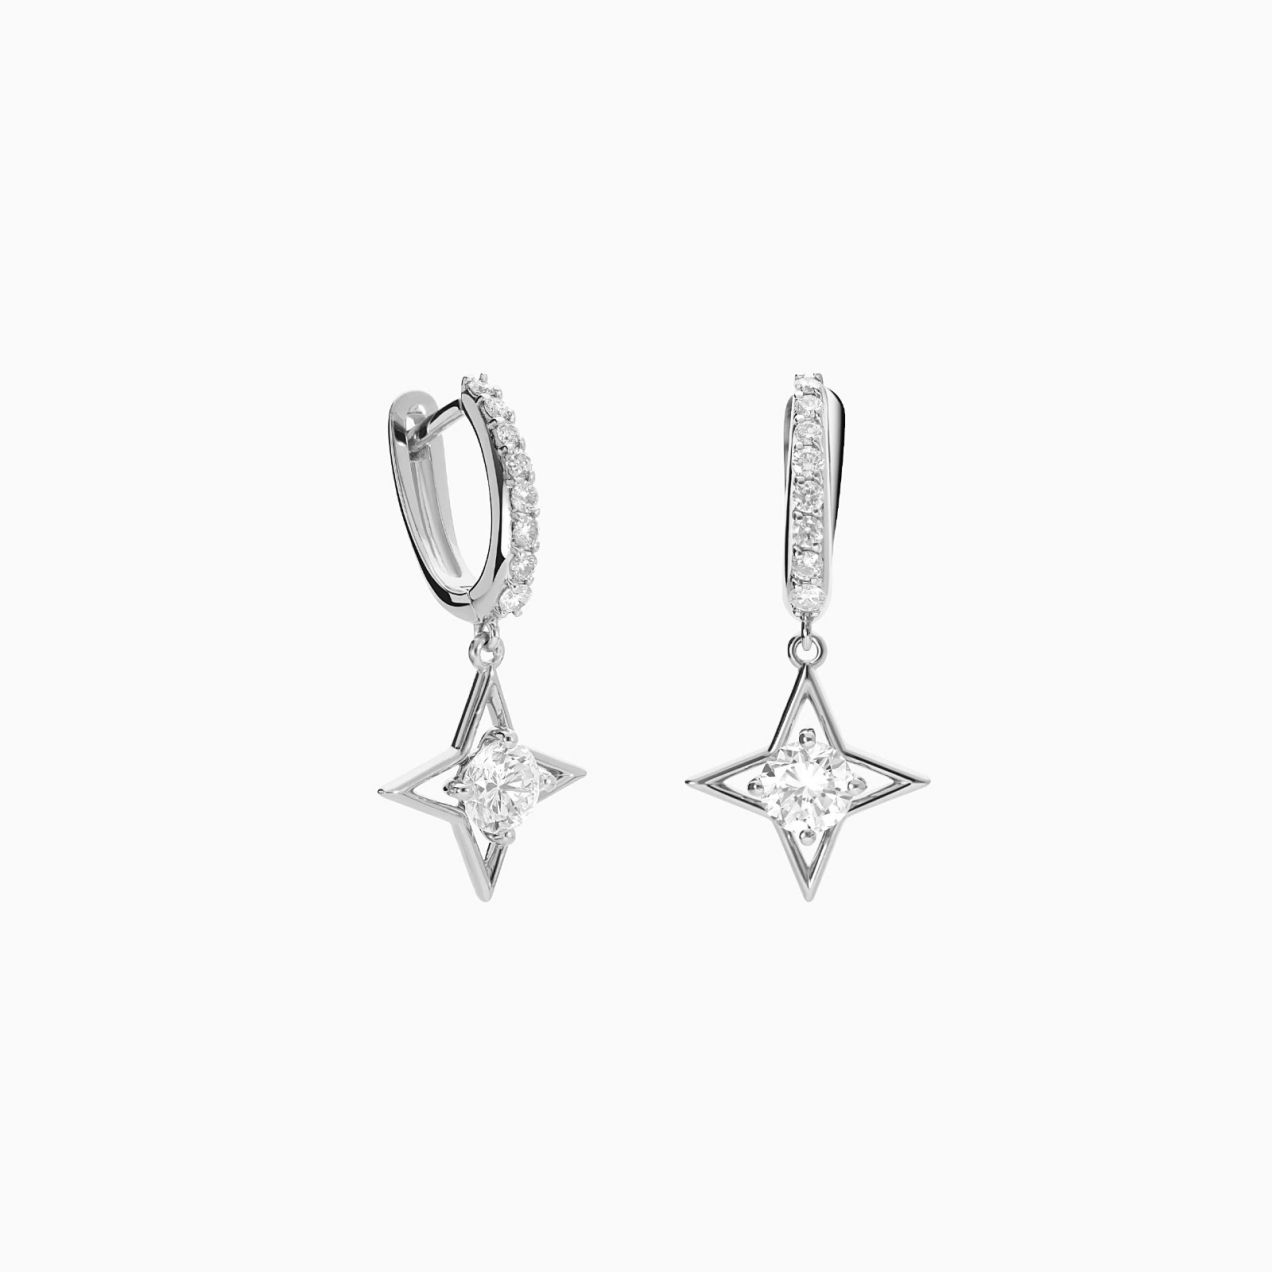 Star earrings in white gold with diamonds and a central diamond